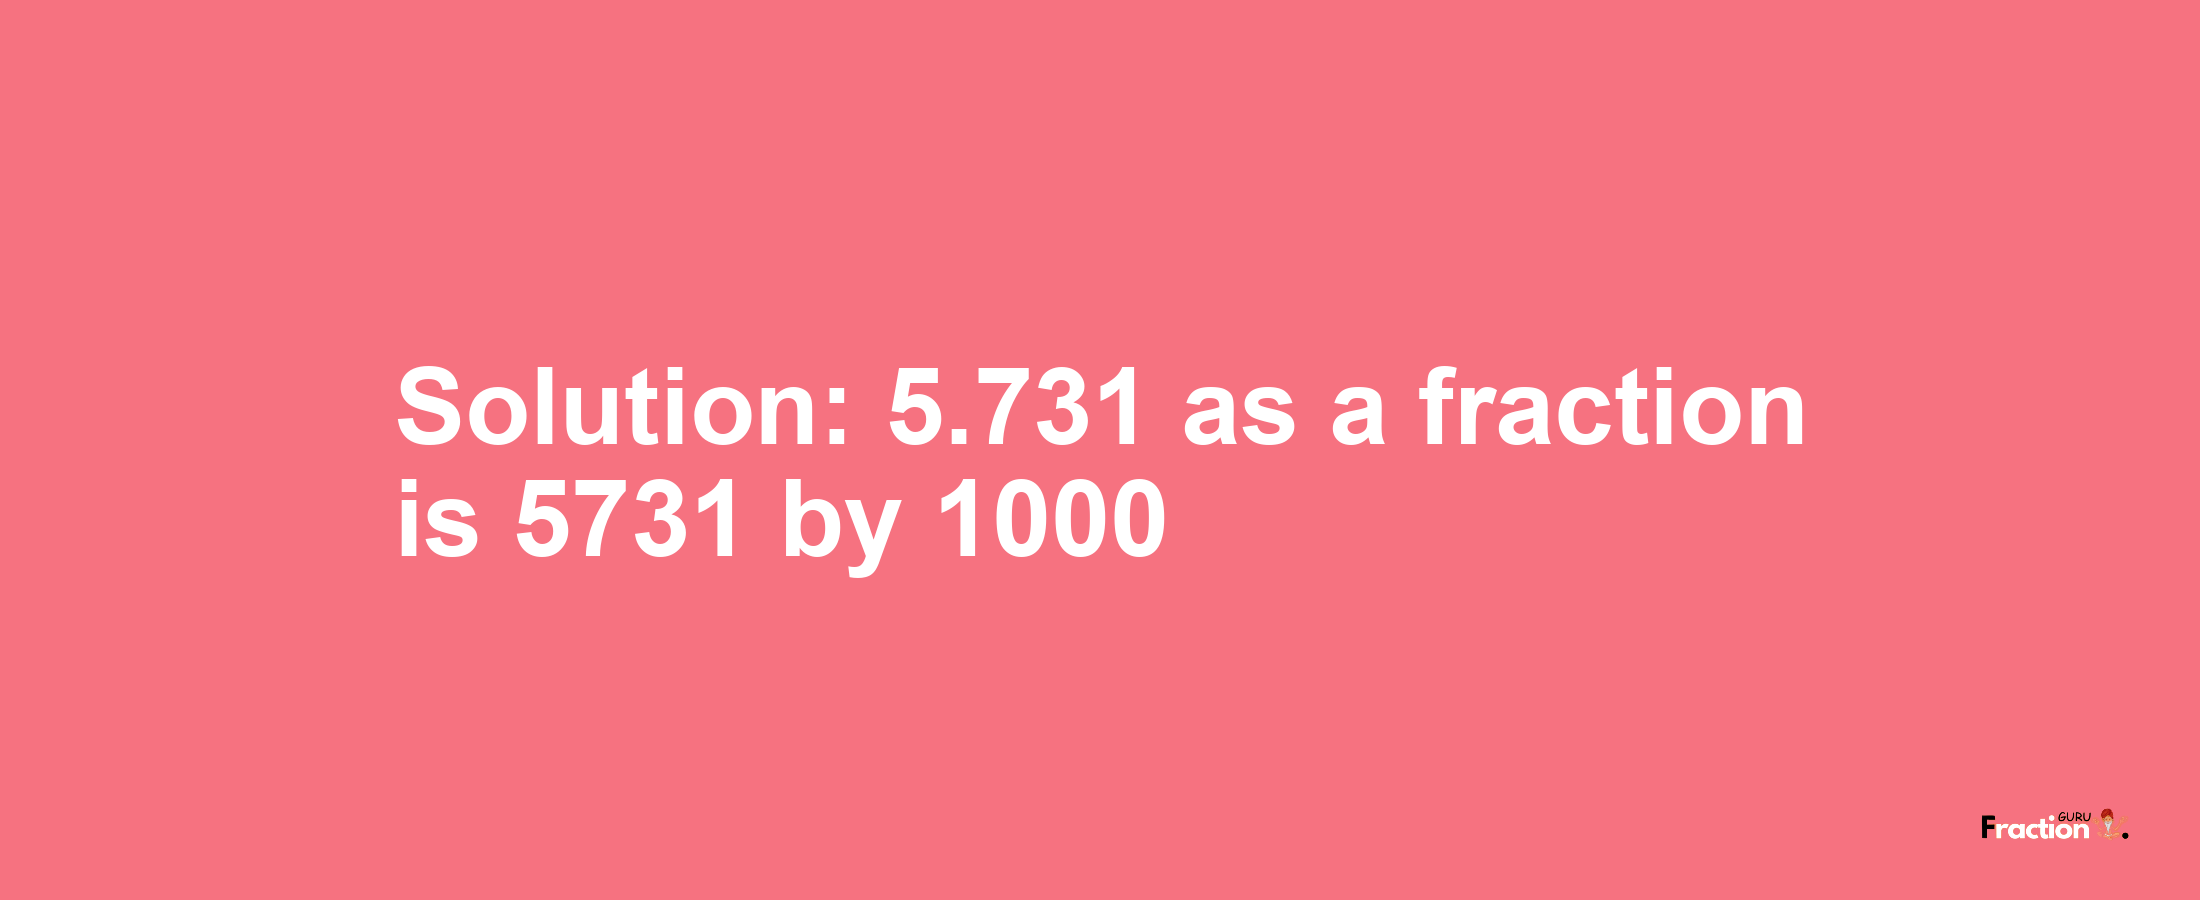 Solution:5.731 as a fraction is 5731/1000